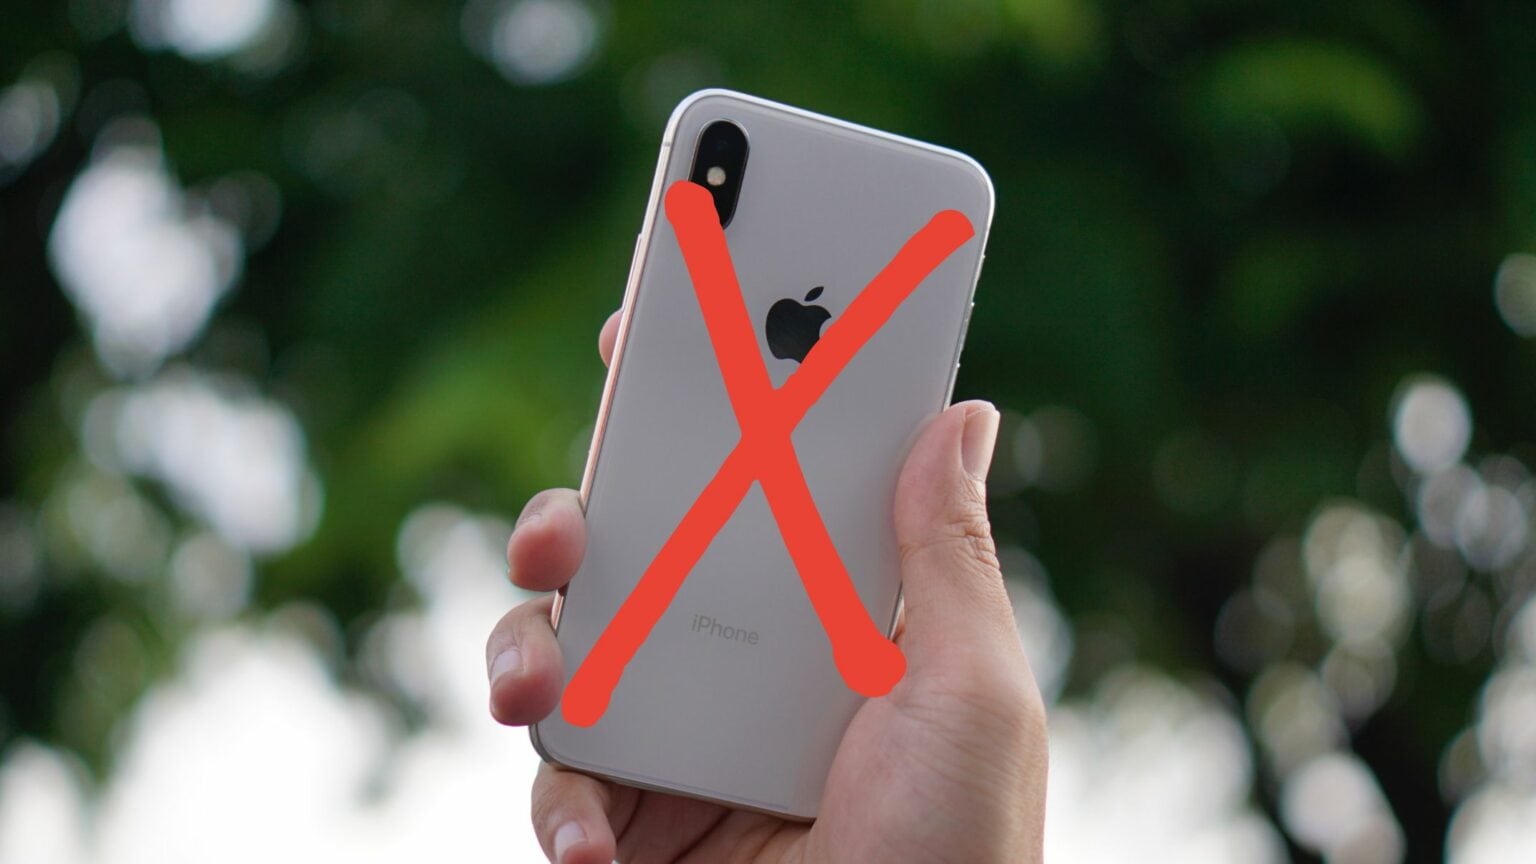 iPhone X with a red X sign on top.